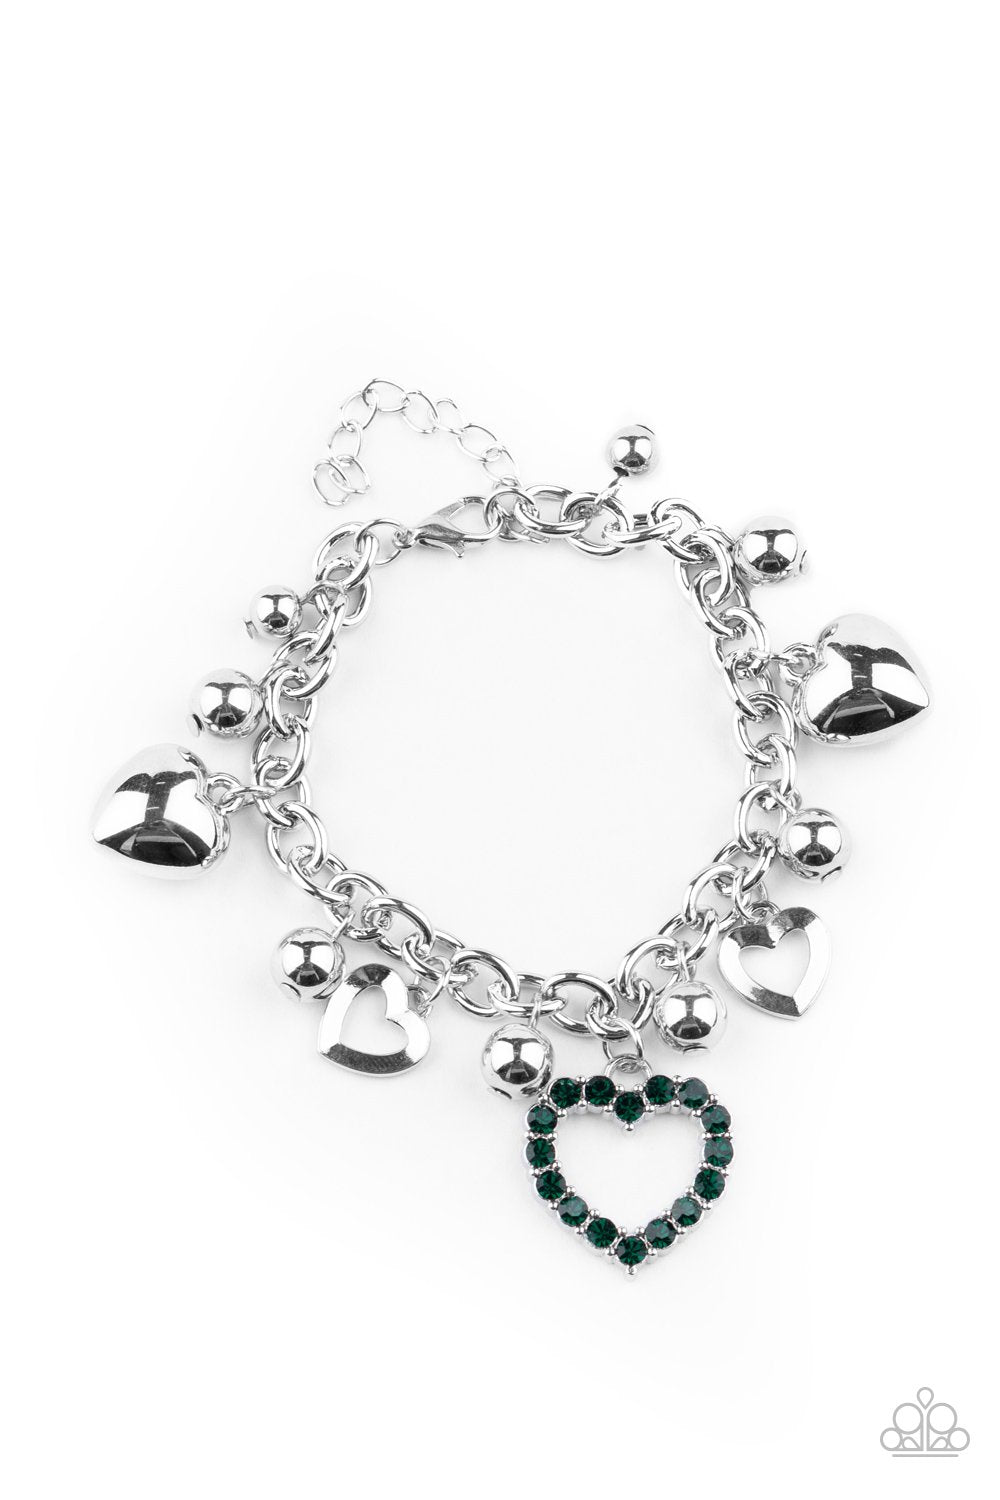 Beautifully Big-Hearted Green Rhinestone and Silver Heart Charm Bracelet - Paparazzi Accessories - lightbox -CarasShop.com - $5 Jewelry by Cara Jewels